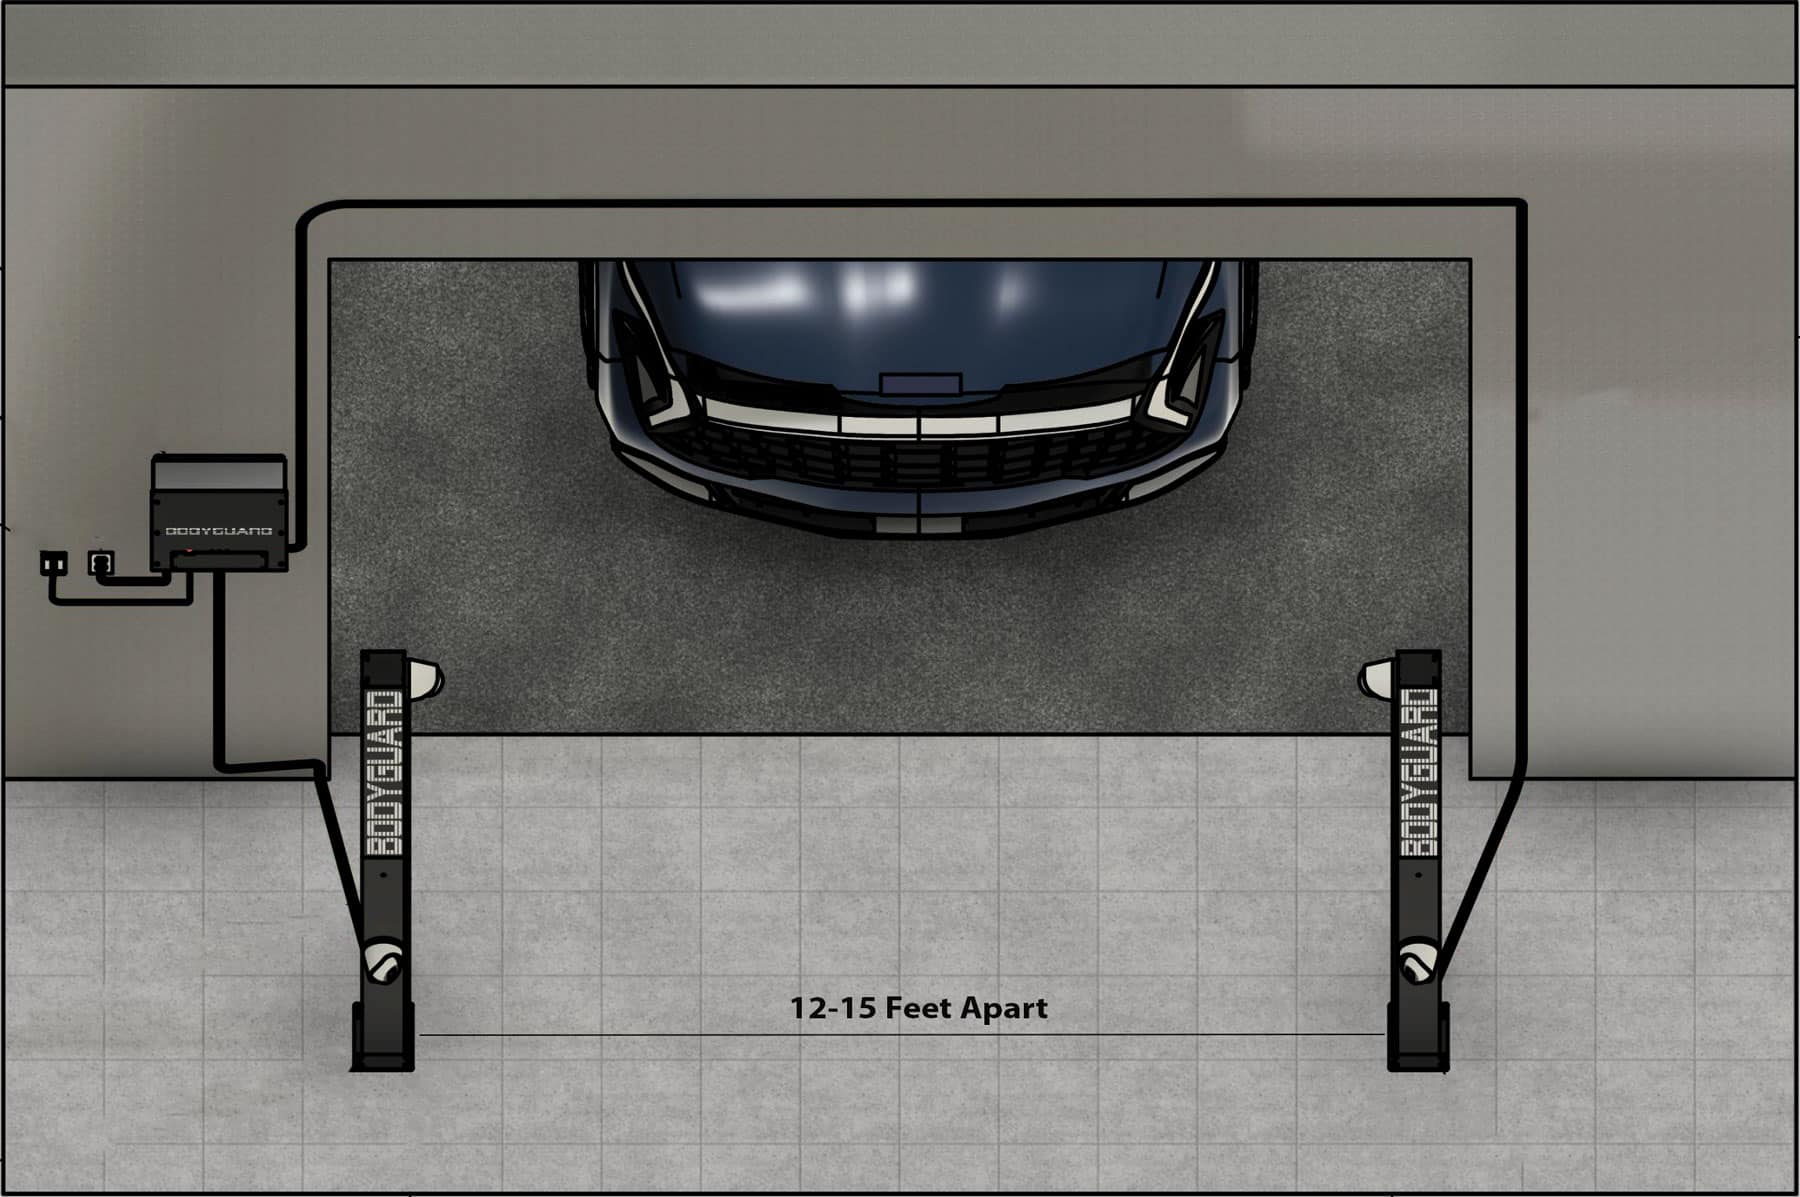 A top-down view diagram illustrates that two Coats bodyguard towers can be placed at the entrance of a service lane, one on each side of the entrance a car can drive between the towers